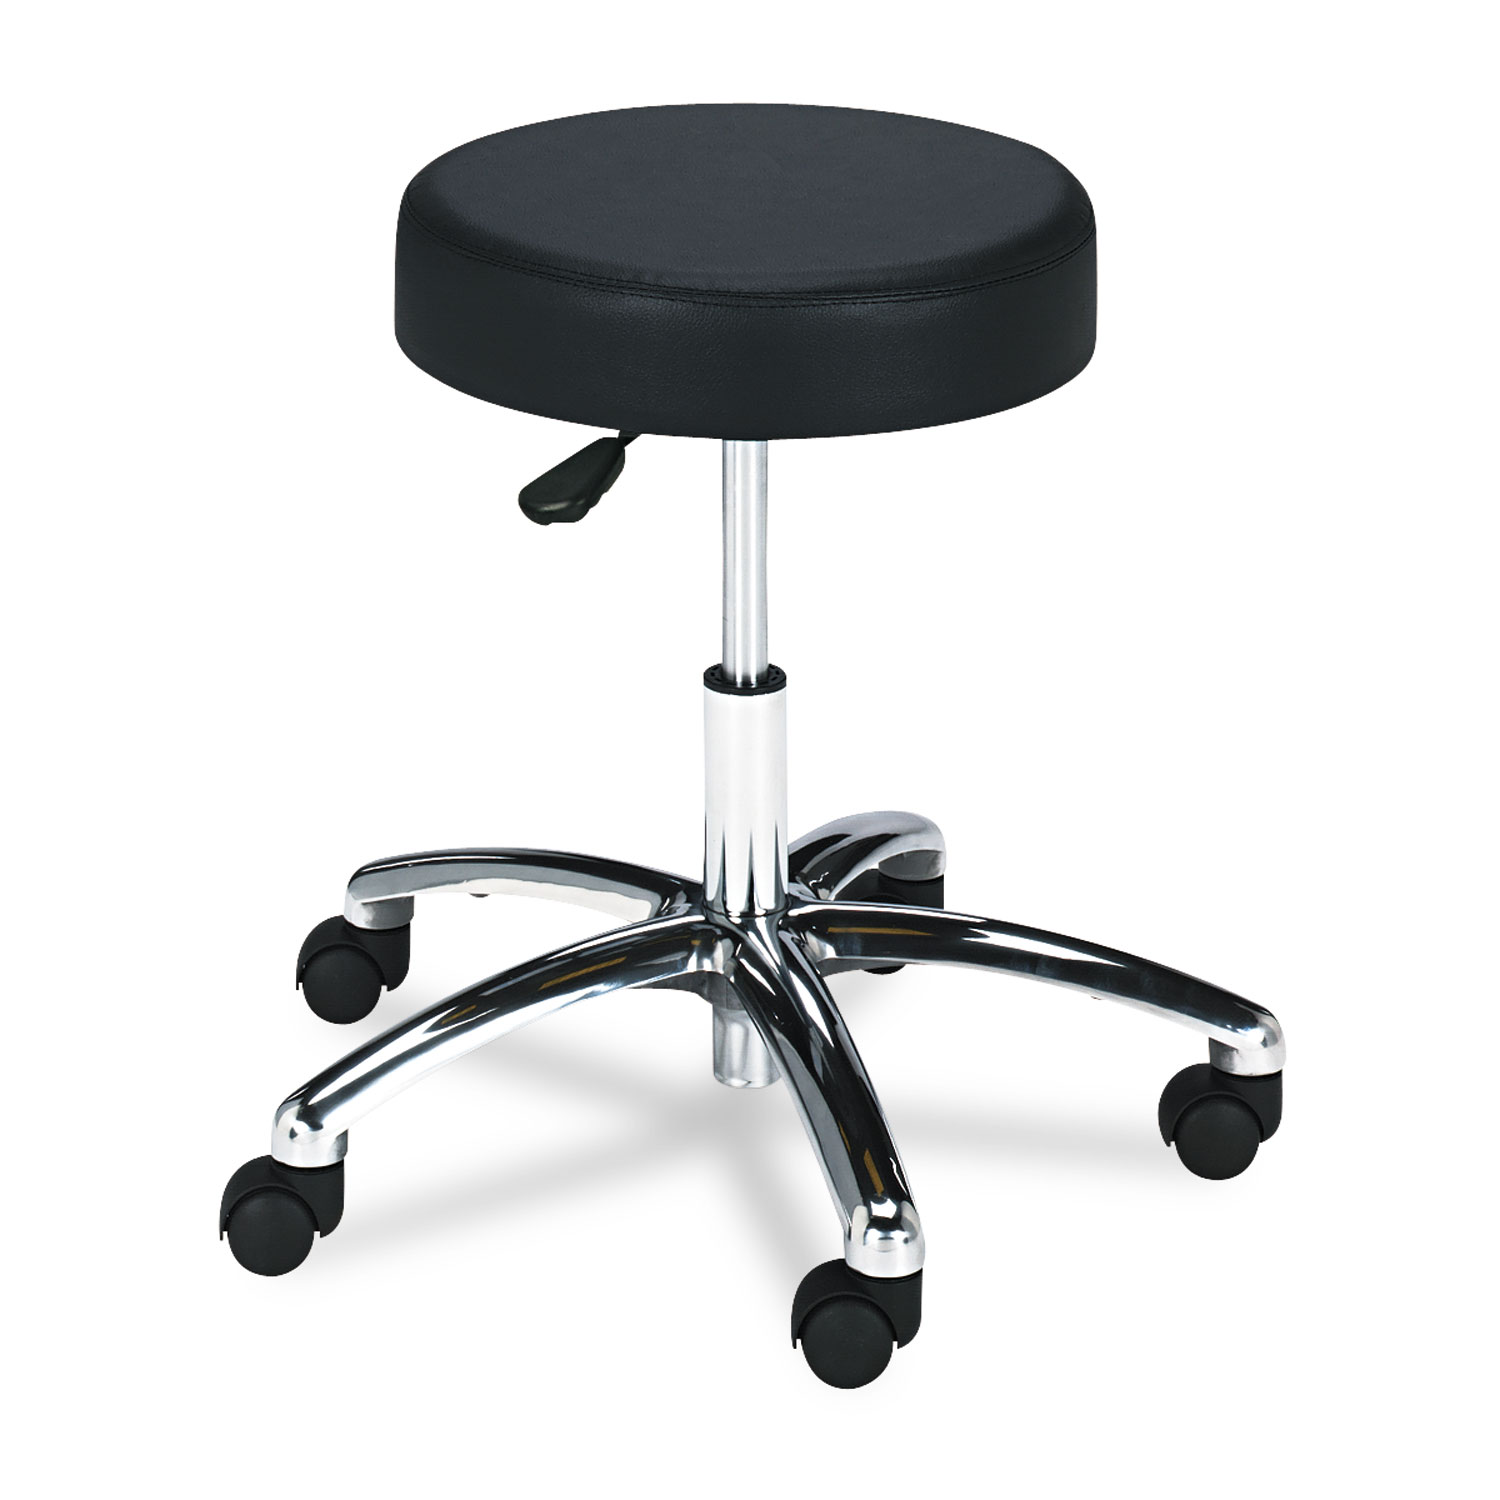  Safco 3431BL Pneumatic Lab Stool without Back, 22 Seat Height, Supports up to 250 lbs., Black Seat/Black Back, Chrome Base (SAF3431BL) 